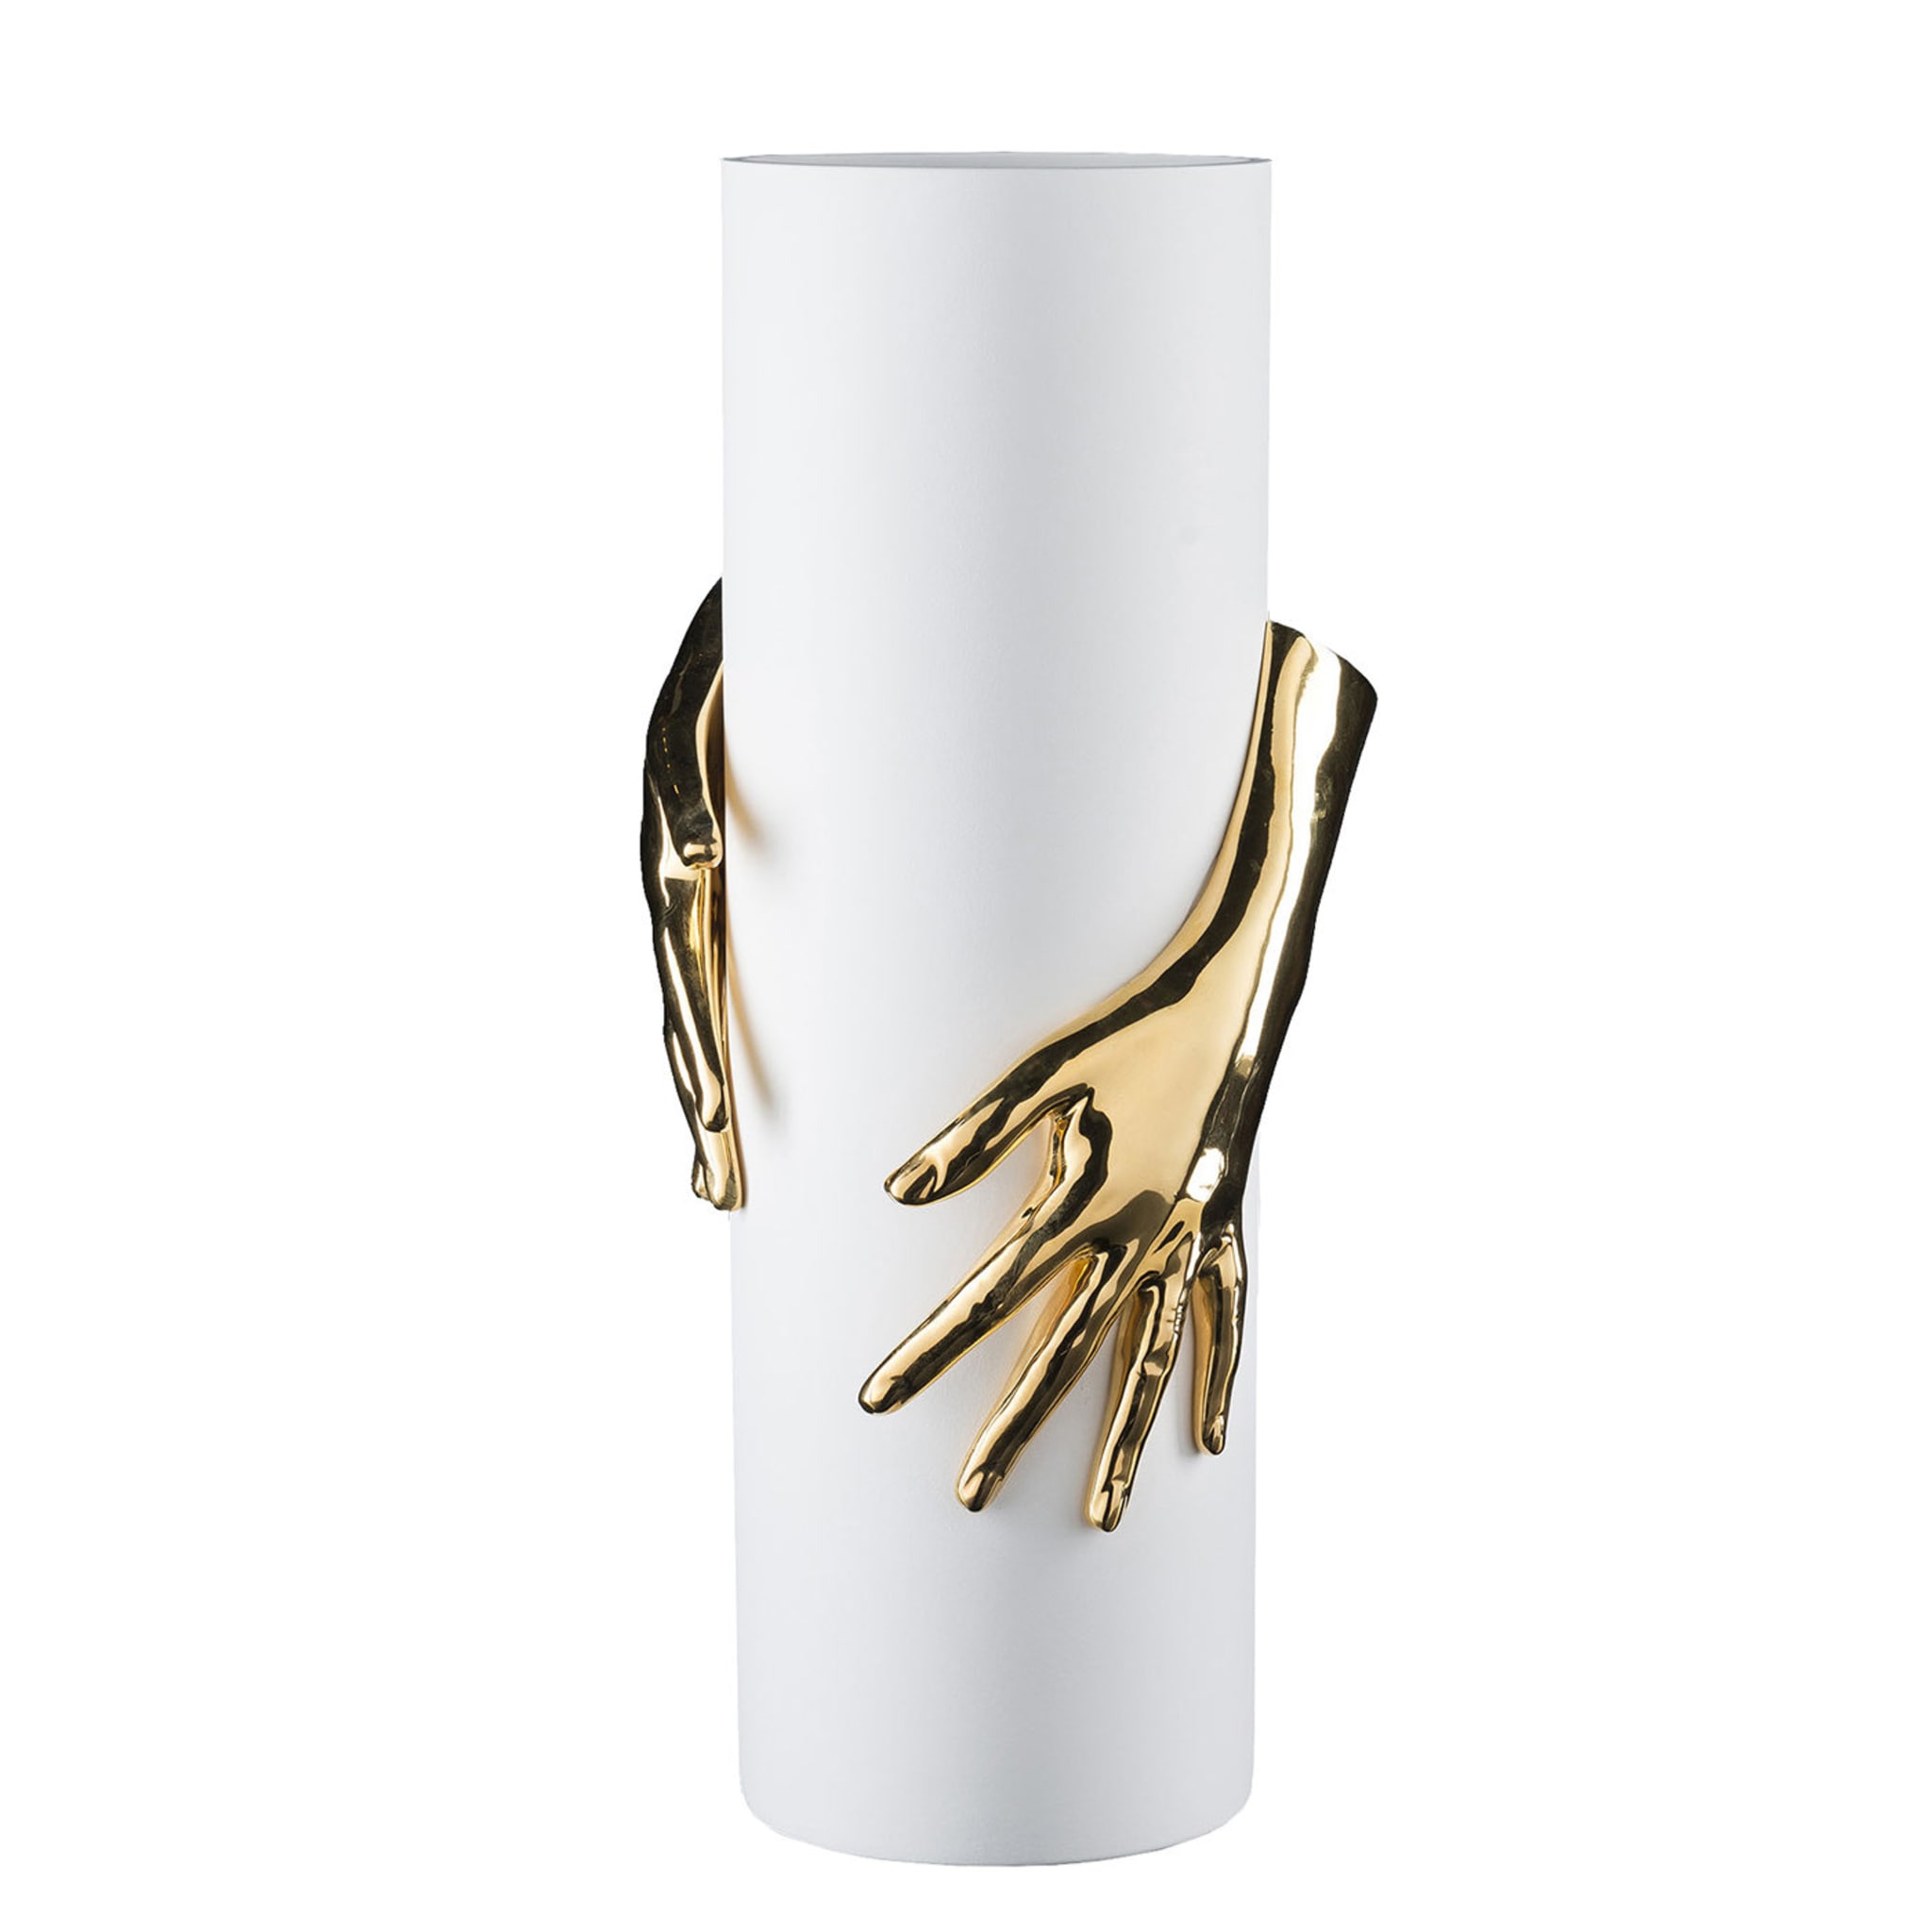 Hands Gold and White Vase - Alternative view 1